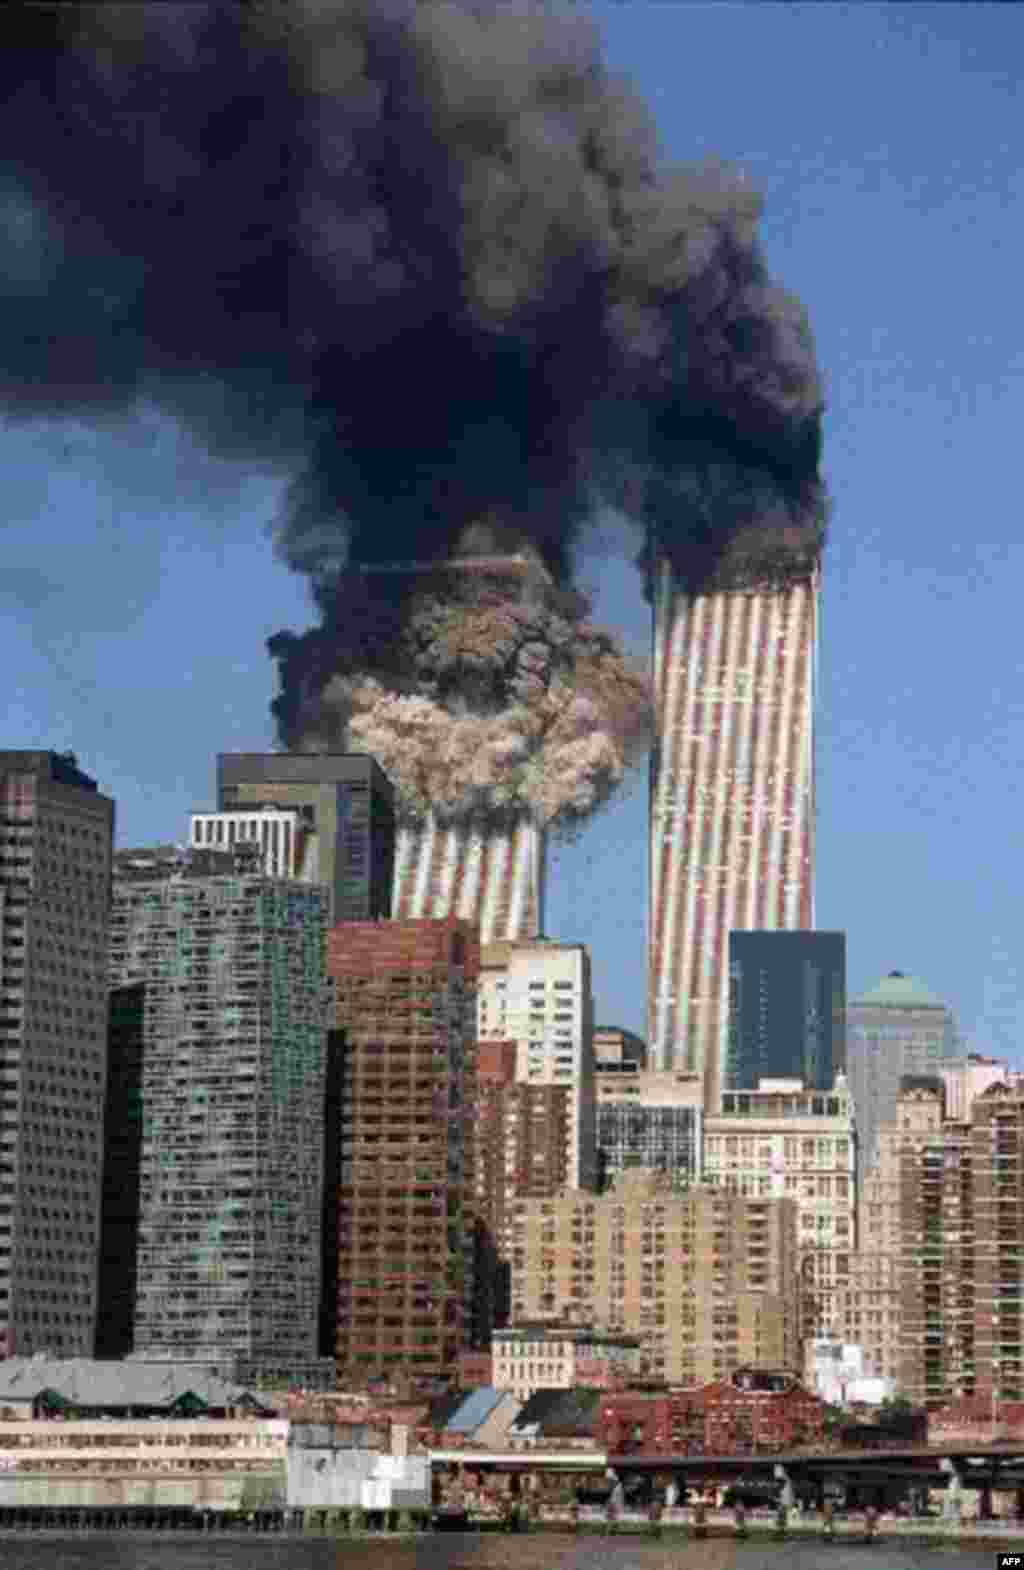 The south tower collapses as smoke billows from both towers of the World Trade Center, in New York, Tuesday, Sept. 11, 2001. In one of the most horrifying attacks ever against the United States, terrorists crashed two airliners into the World Trade Center